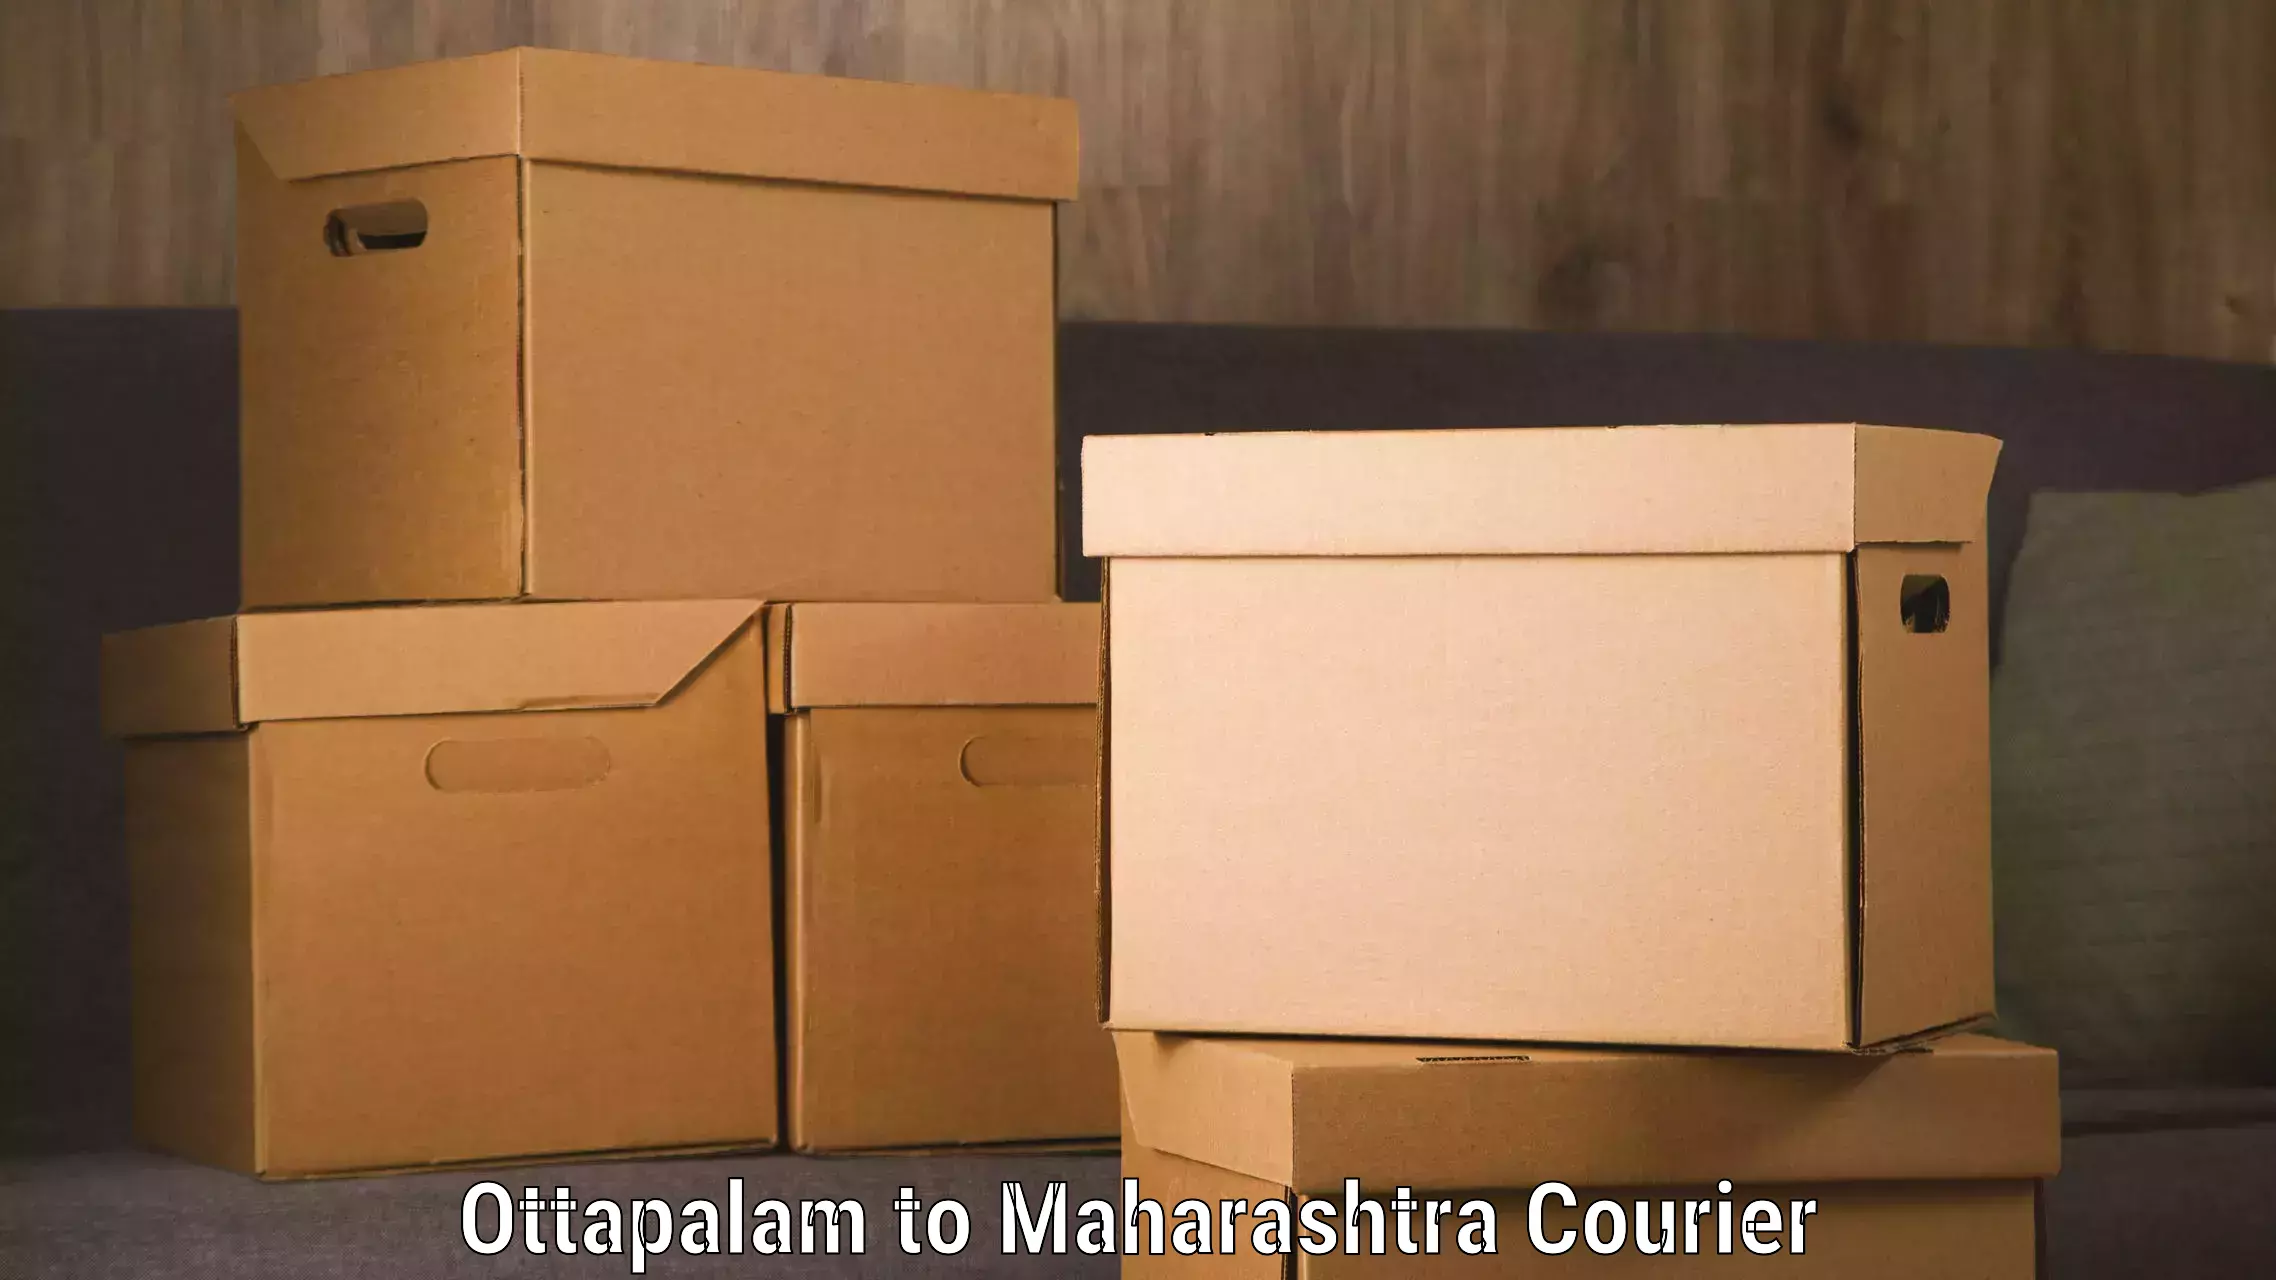 Nationwide shipping coverage Ottapalam to Thane